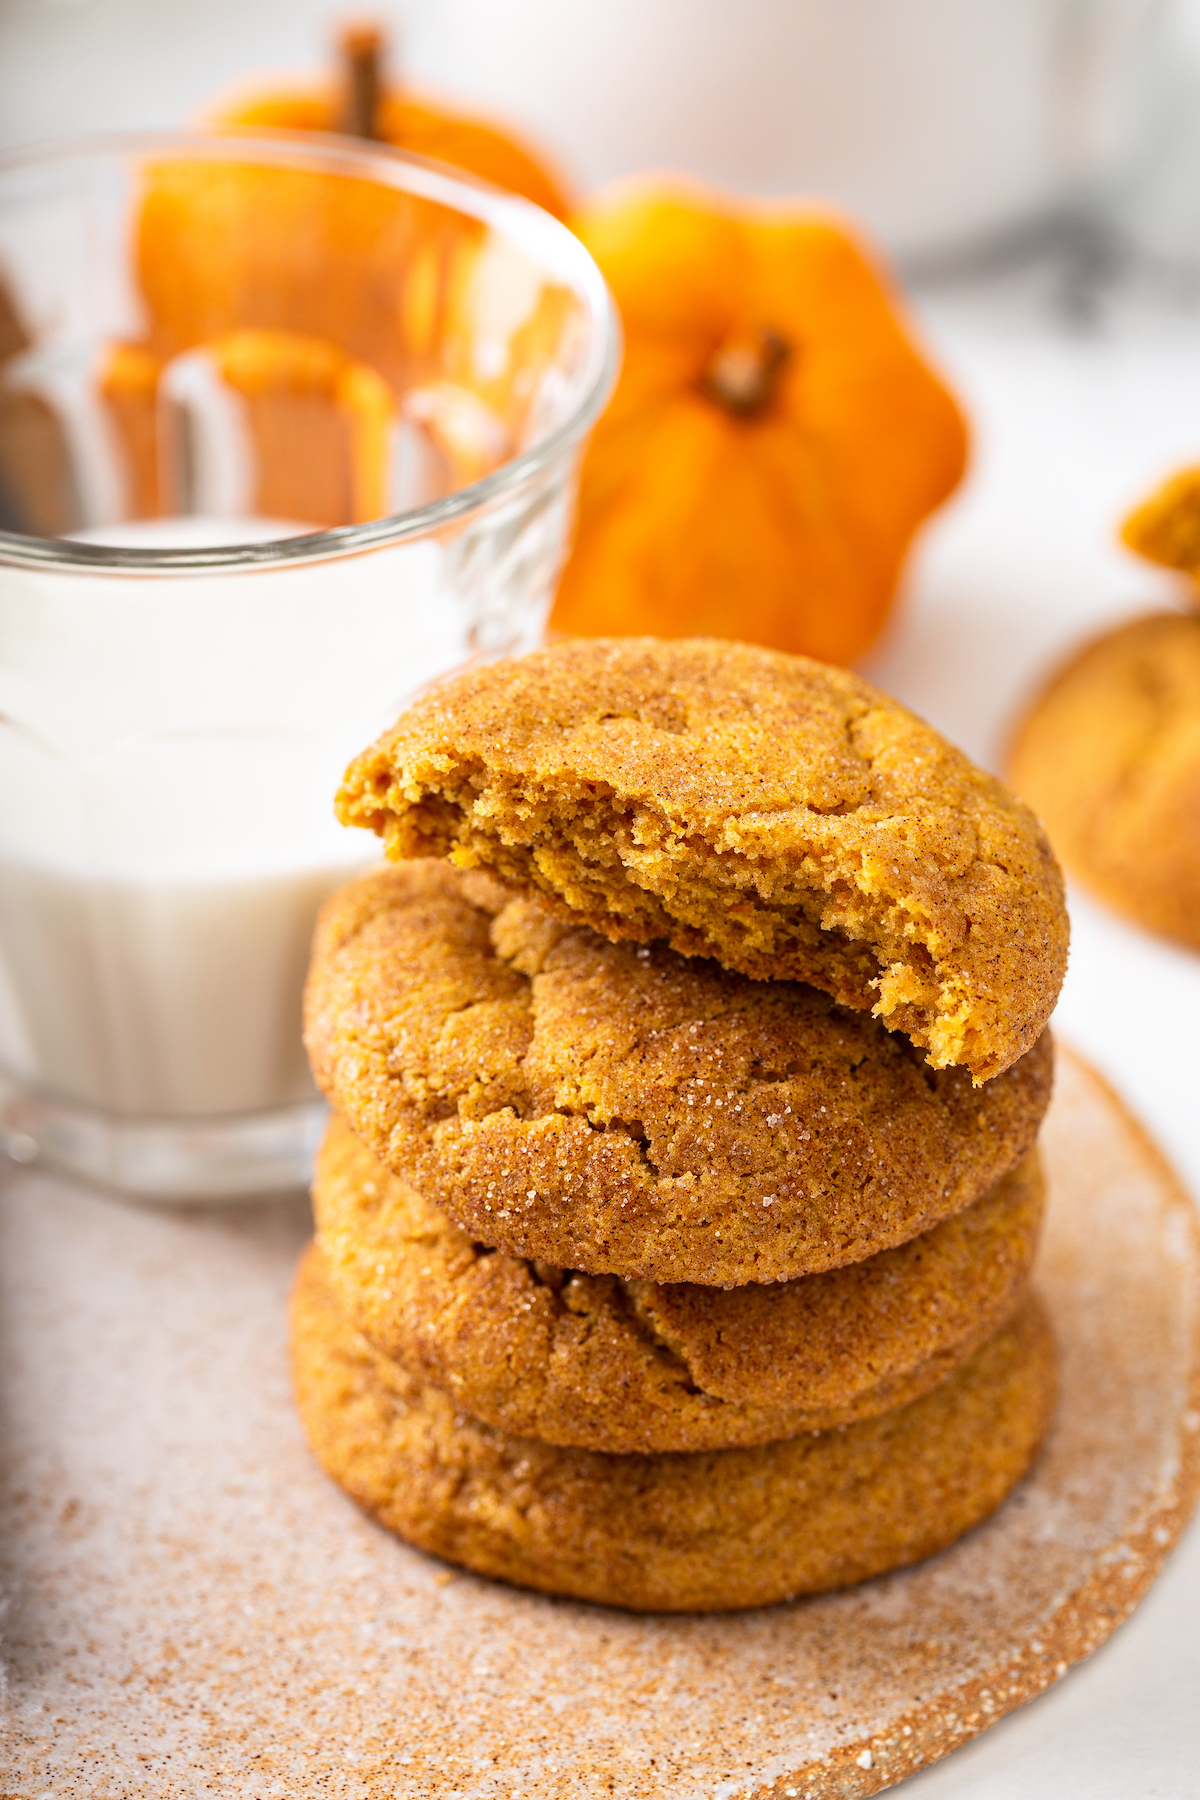 Pumpkin cookies in a stack next to a glass of milk.